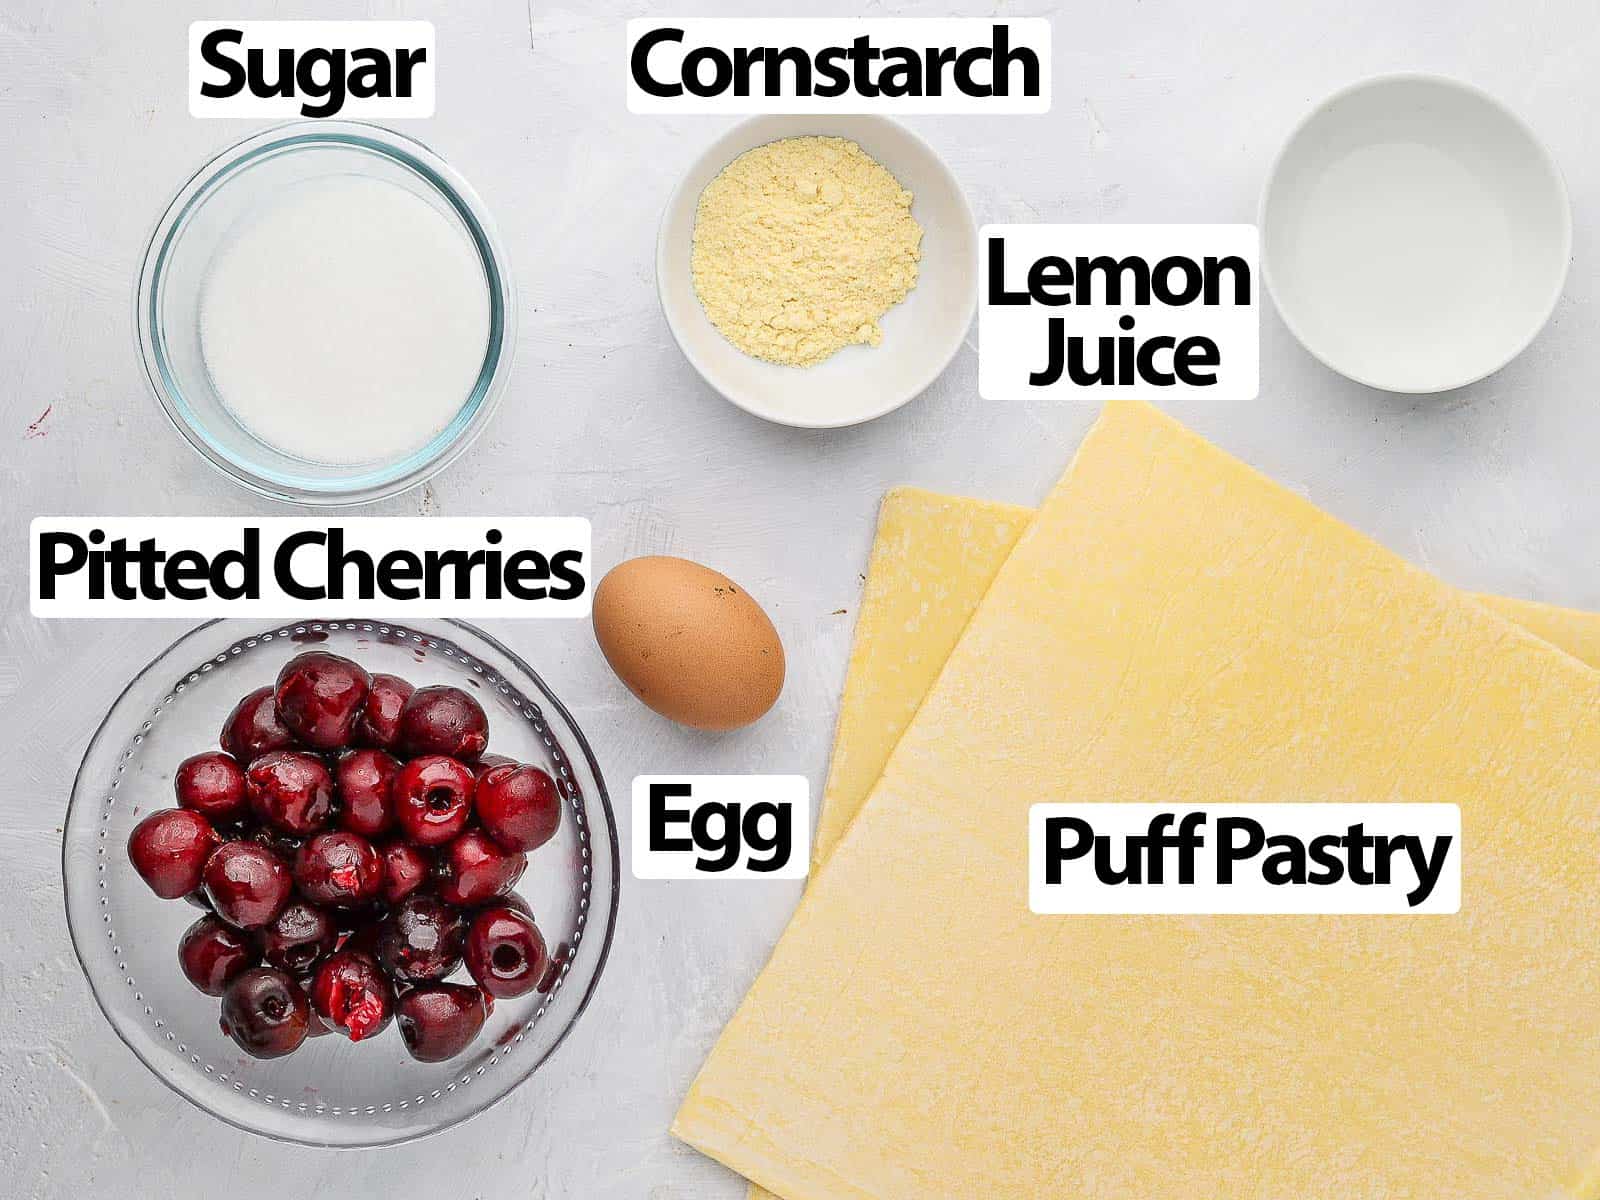 Ingredients on a white surface.